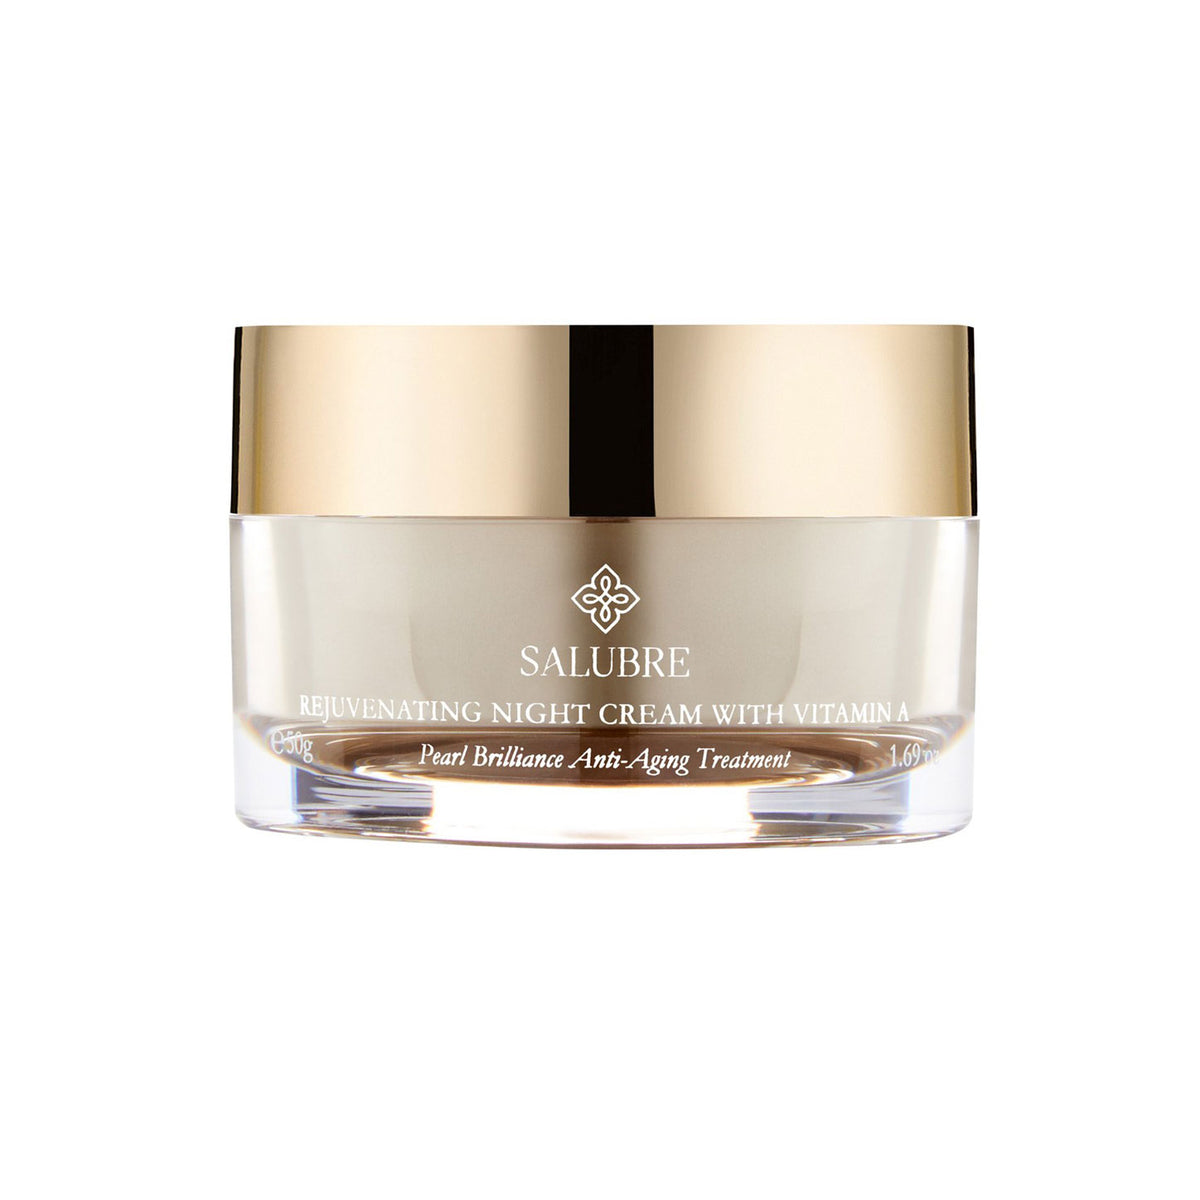 Rejuvenating Night Cream With Vitamin A to reduce the signs of fine lines and wrinkles while you sleep.